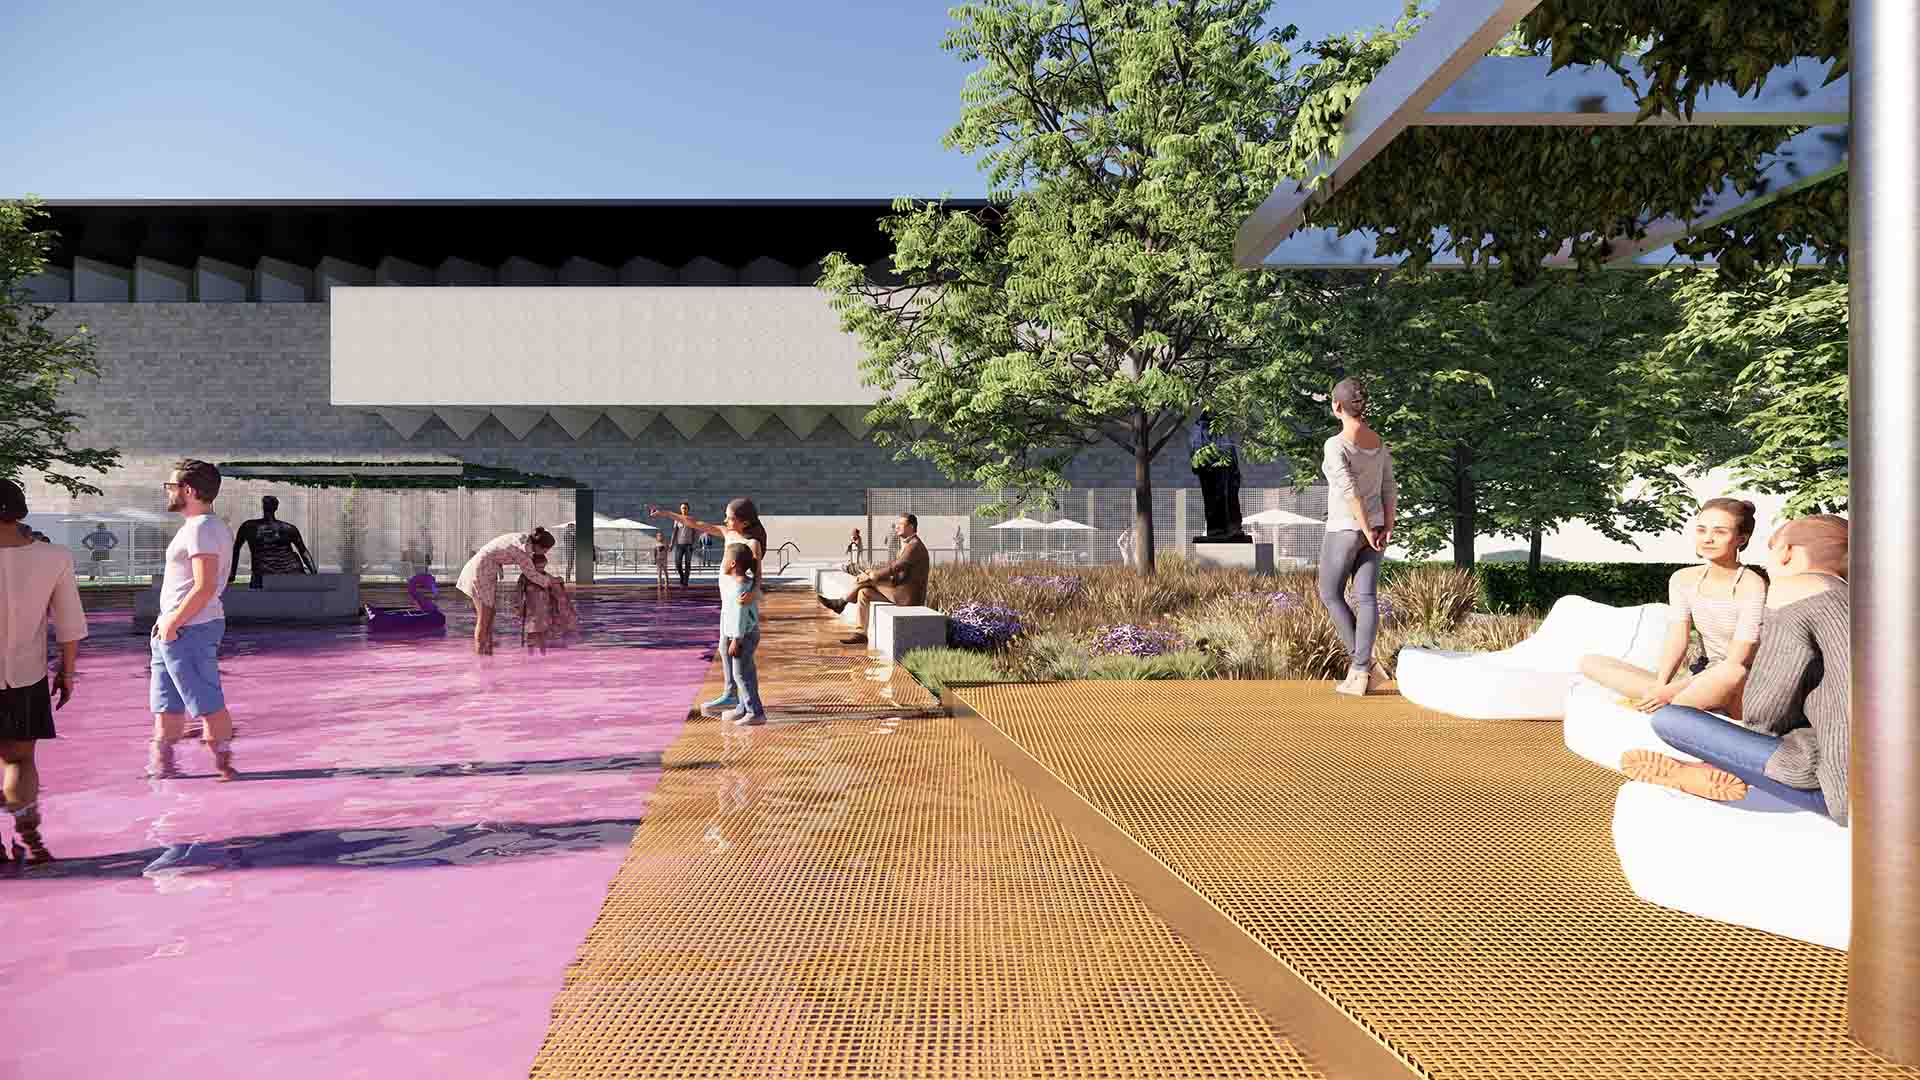 The National Gallery of Victoria's Garden Is Getting a New Pink Pond That You Can Wade Through